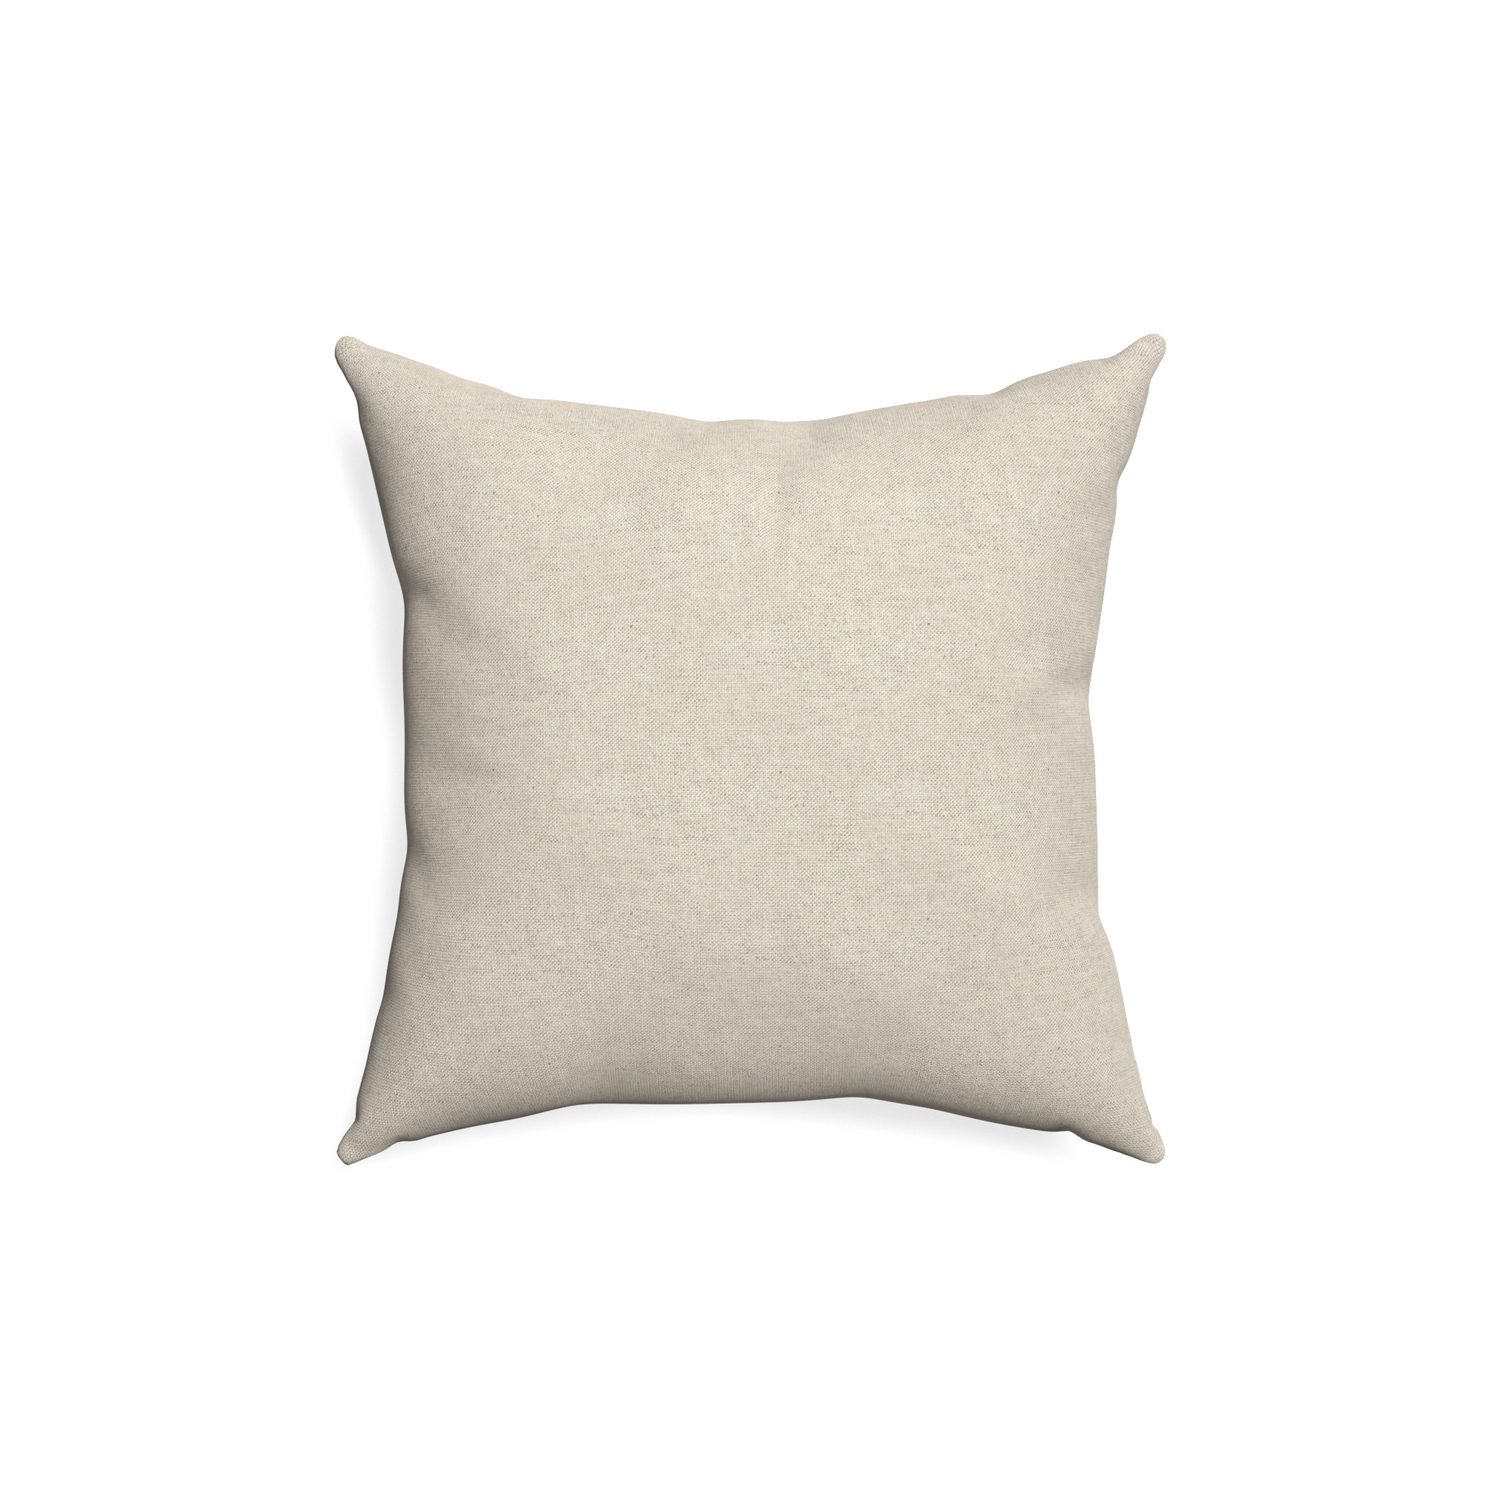 18-square oat custom pillow with none on white background